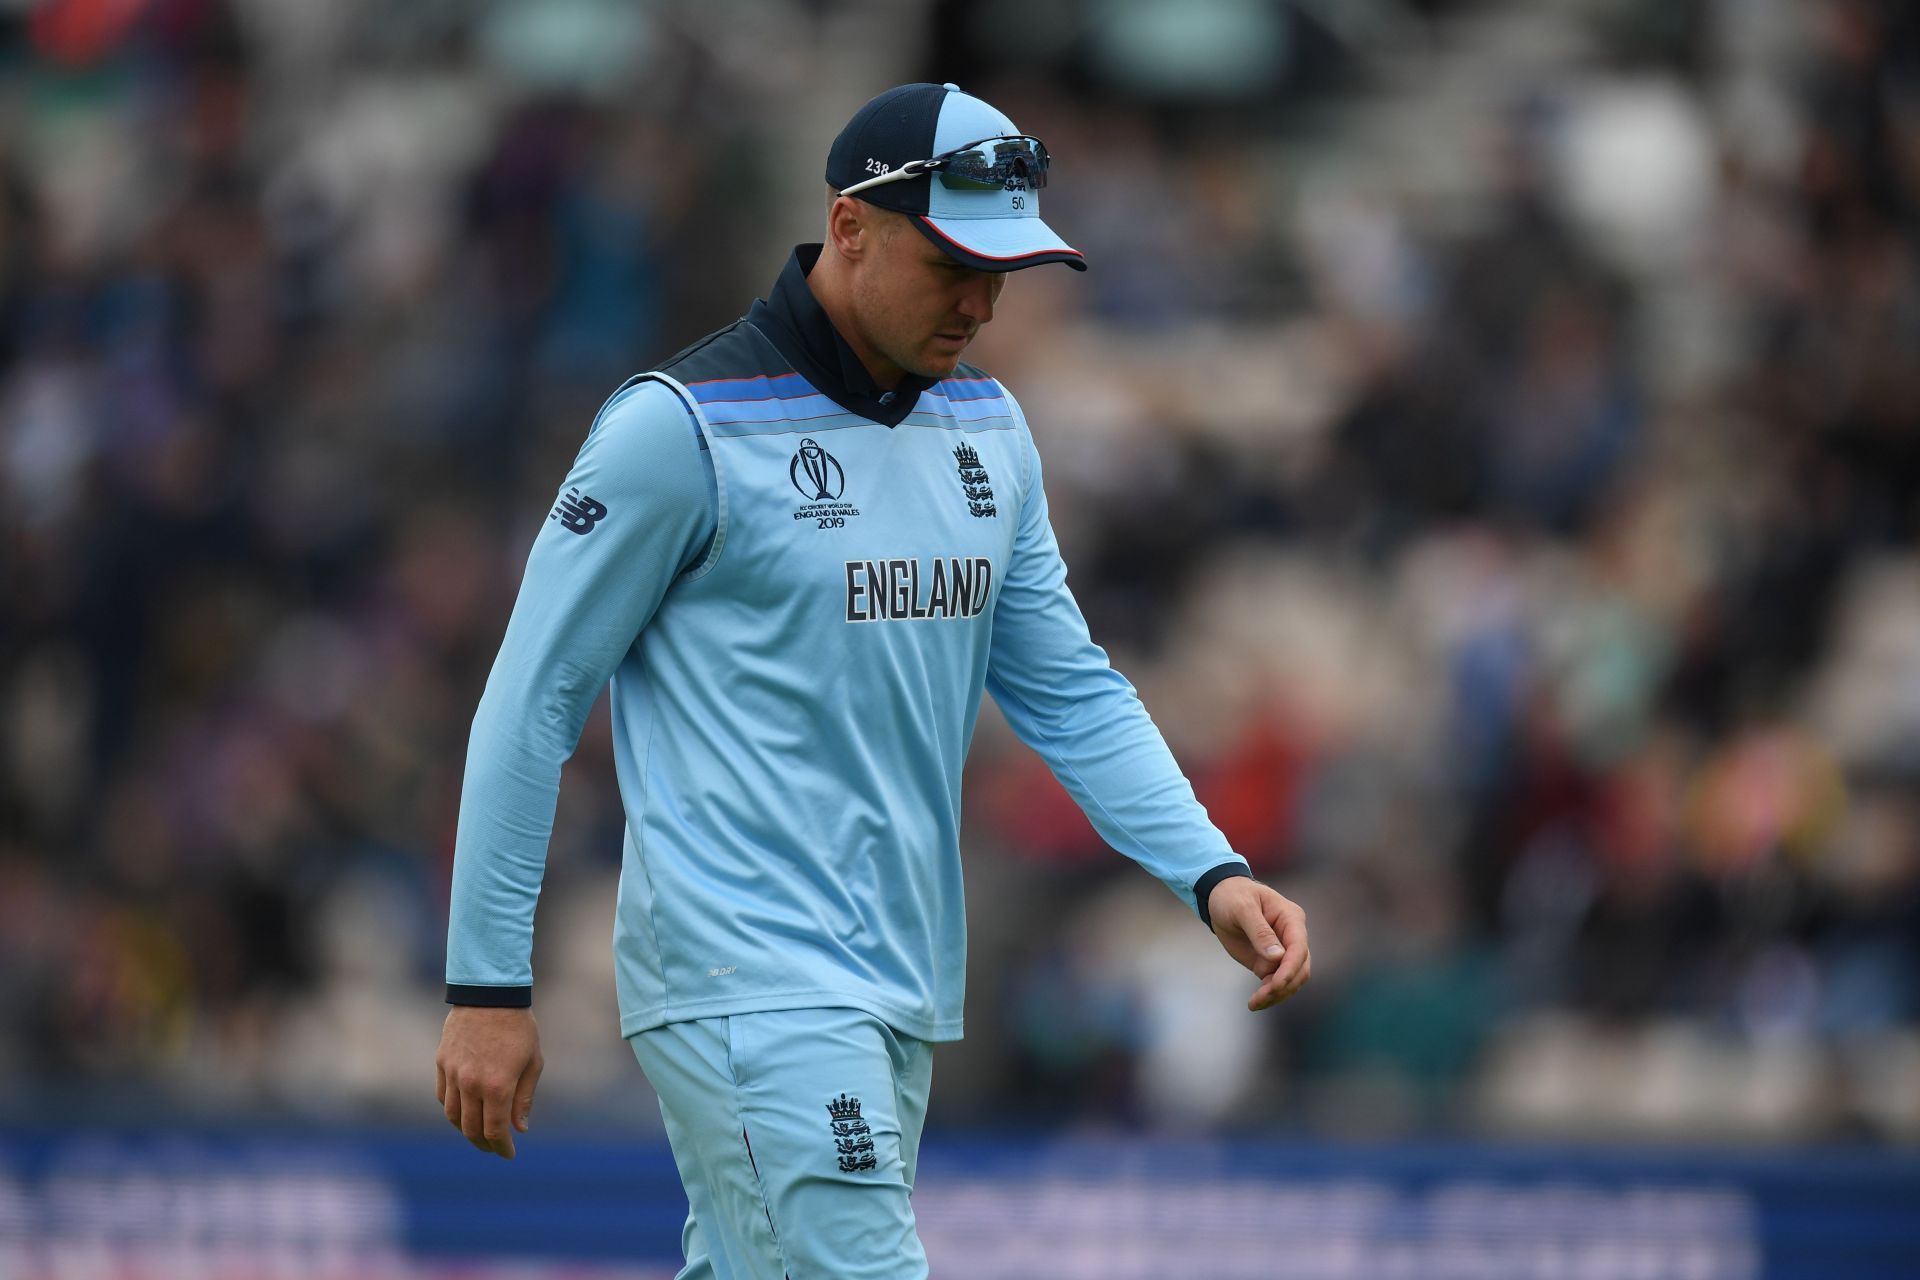 Jason Roy is likely to open the innings for England